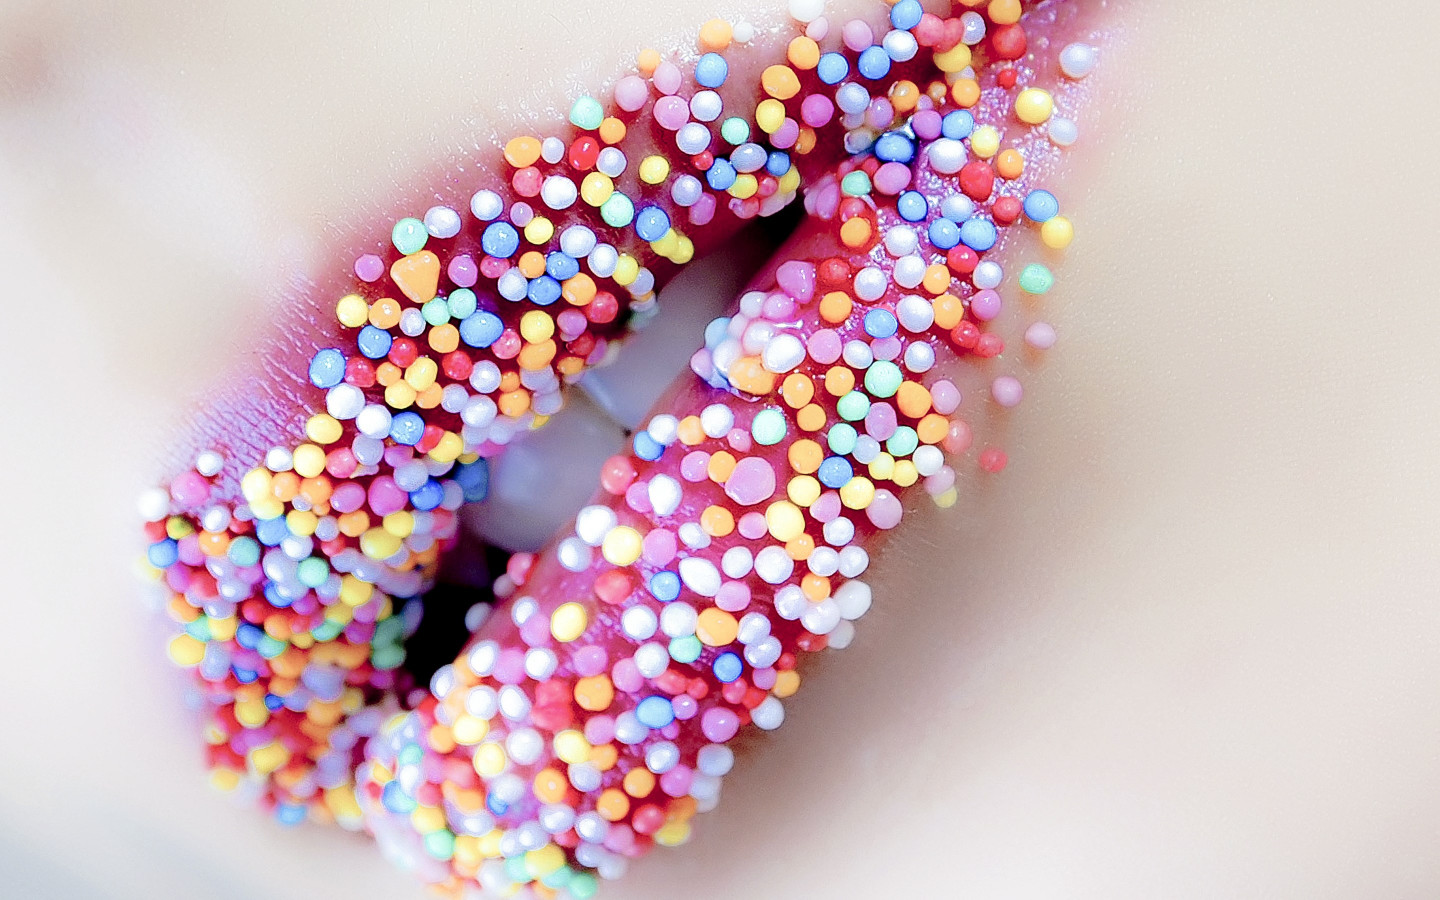 Lips with sweets wallpaper 1440x900